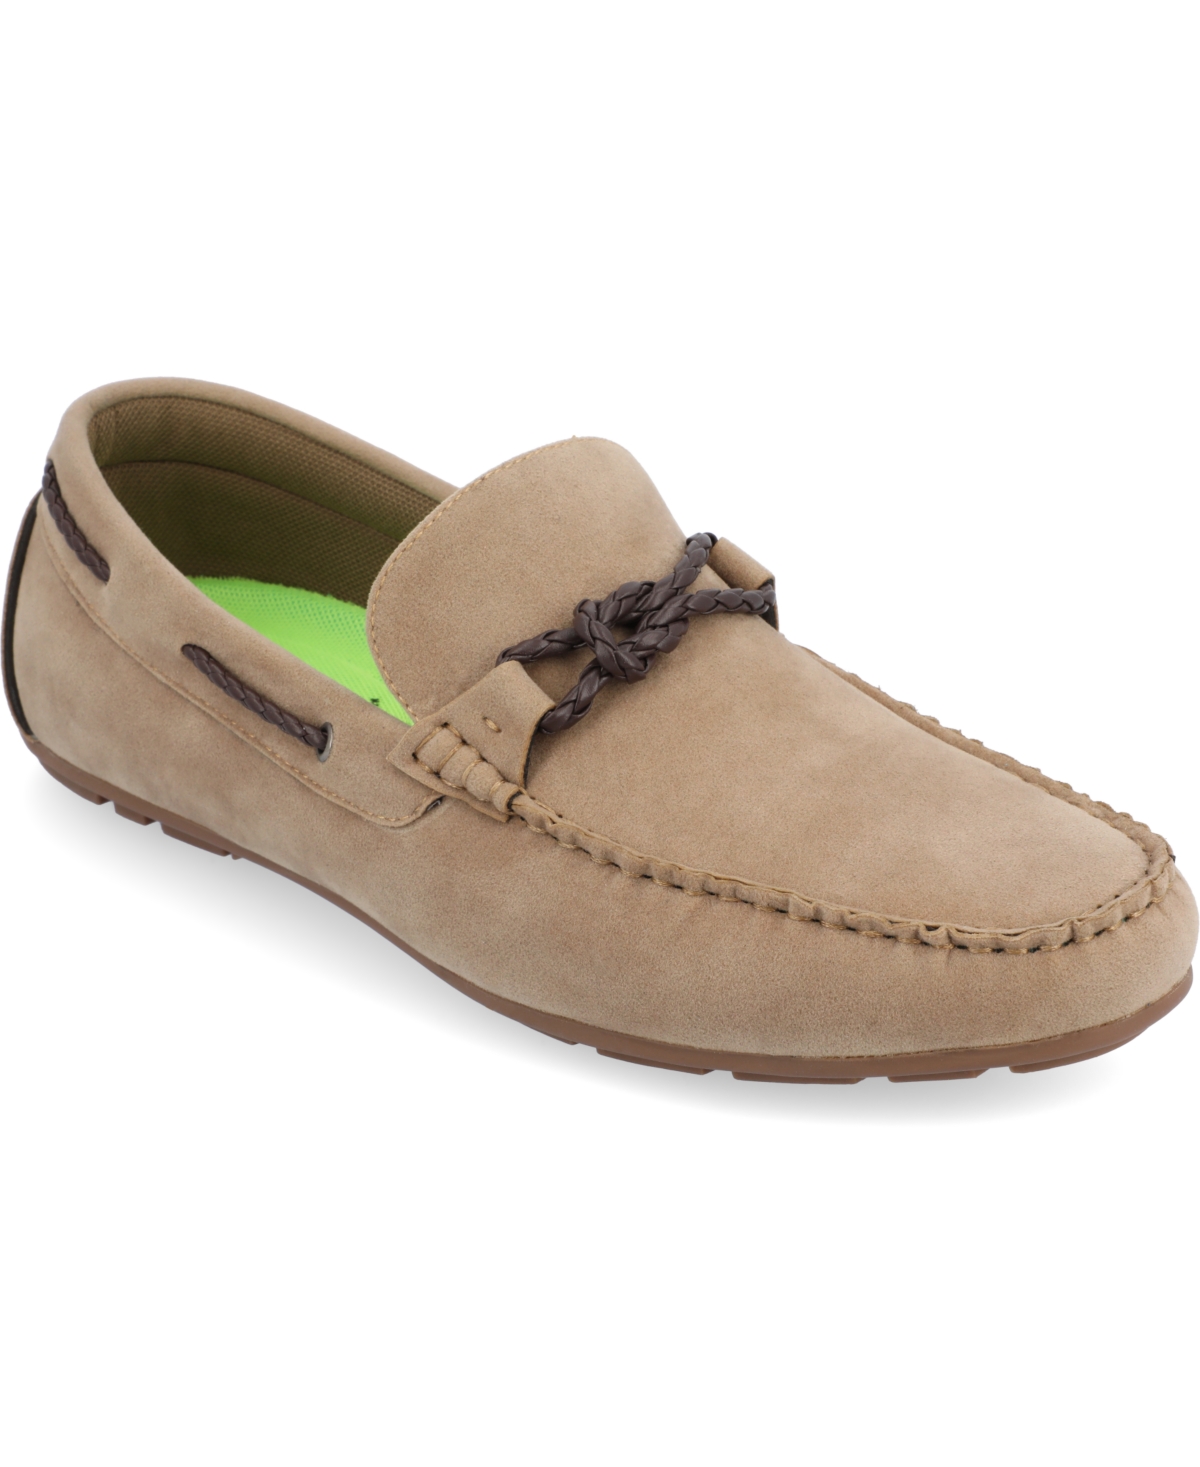 Men's Tyrell Driving Loafers - Taupe